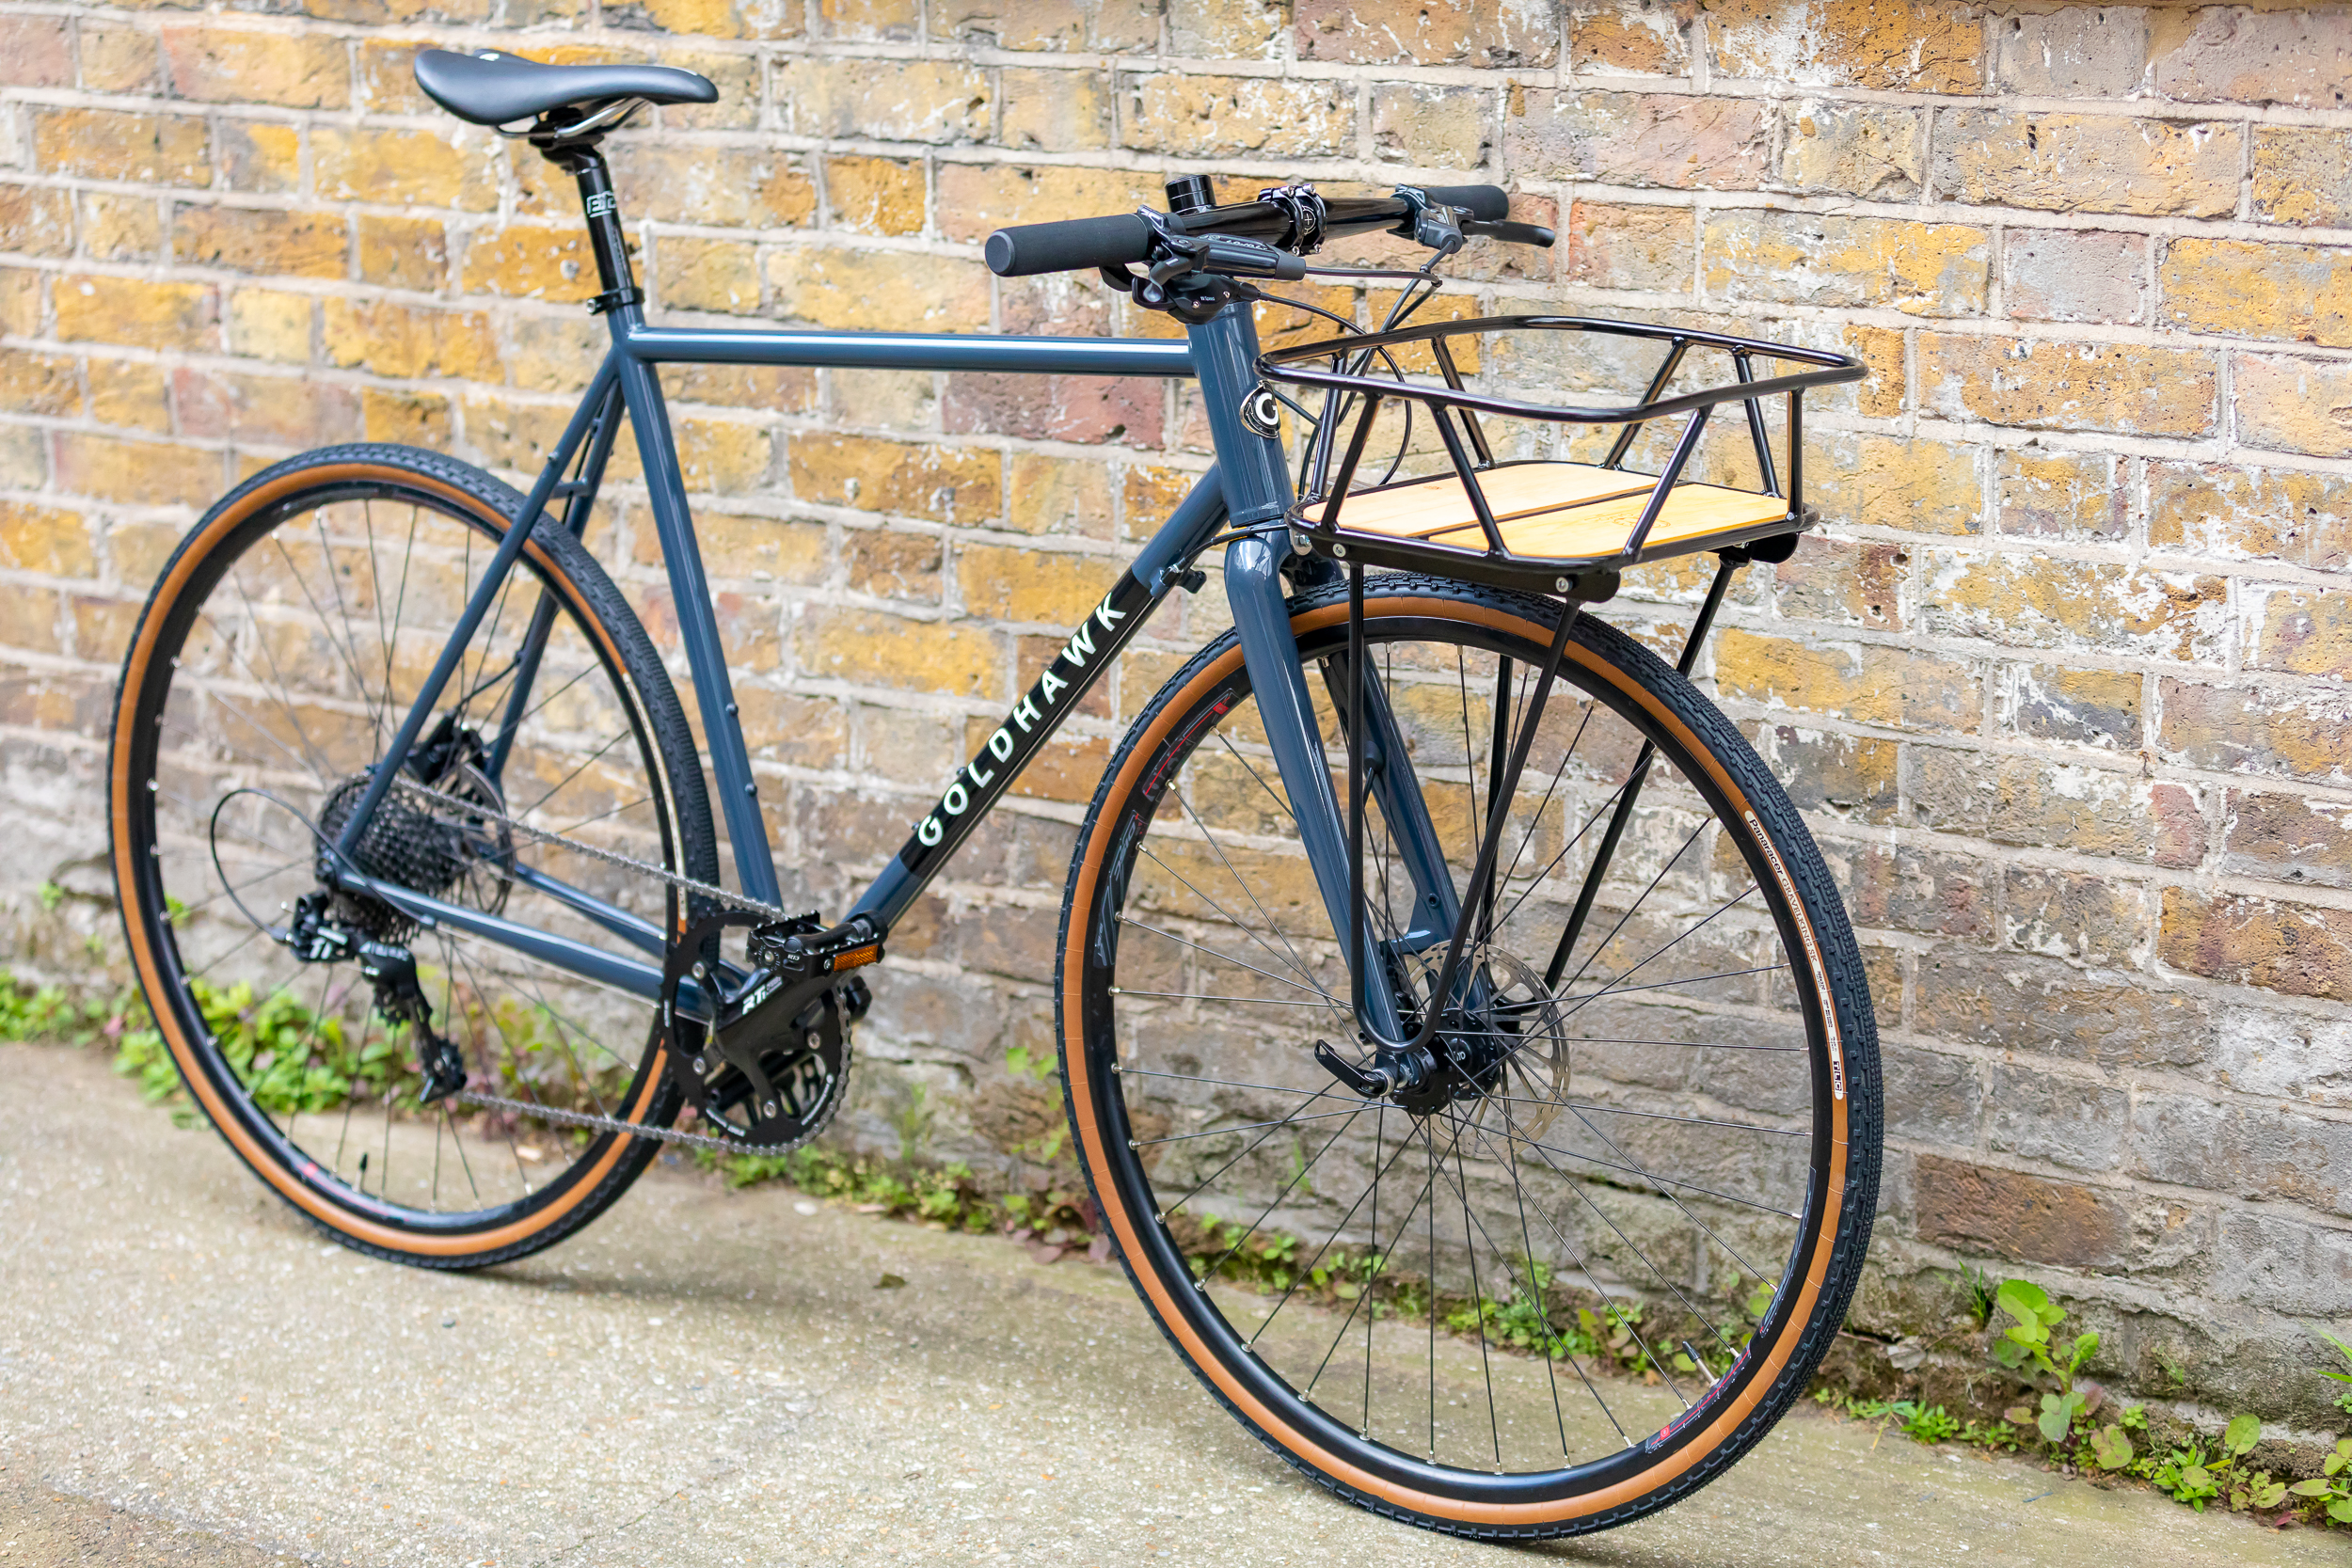 Hand built Goldhawk Rodax with Panaracer Gravel Tyres and Portuer rack options and accessories